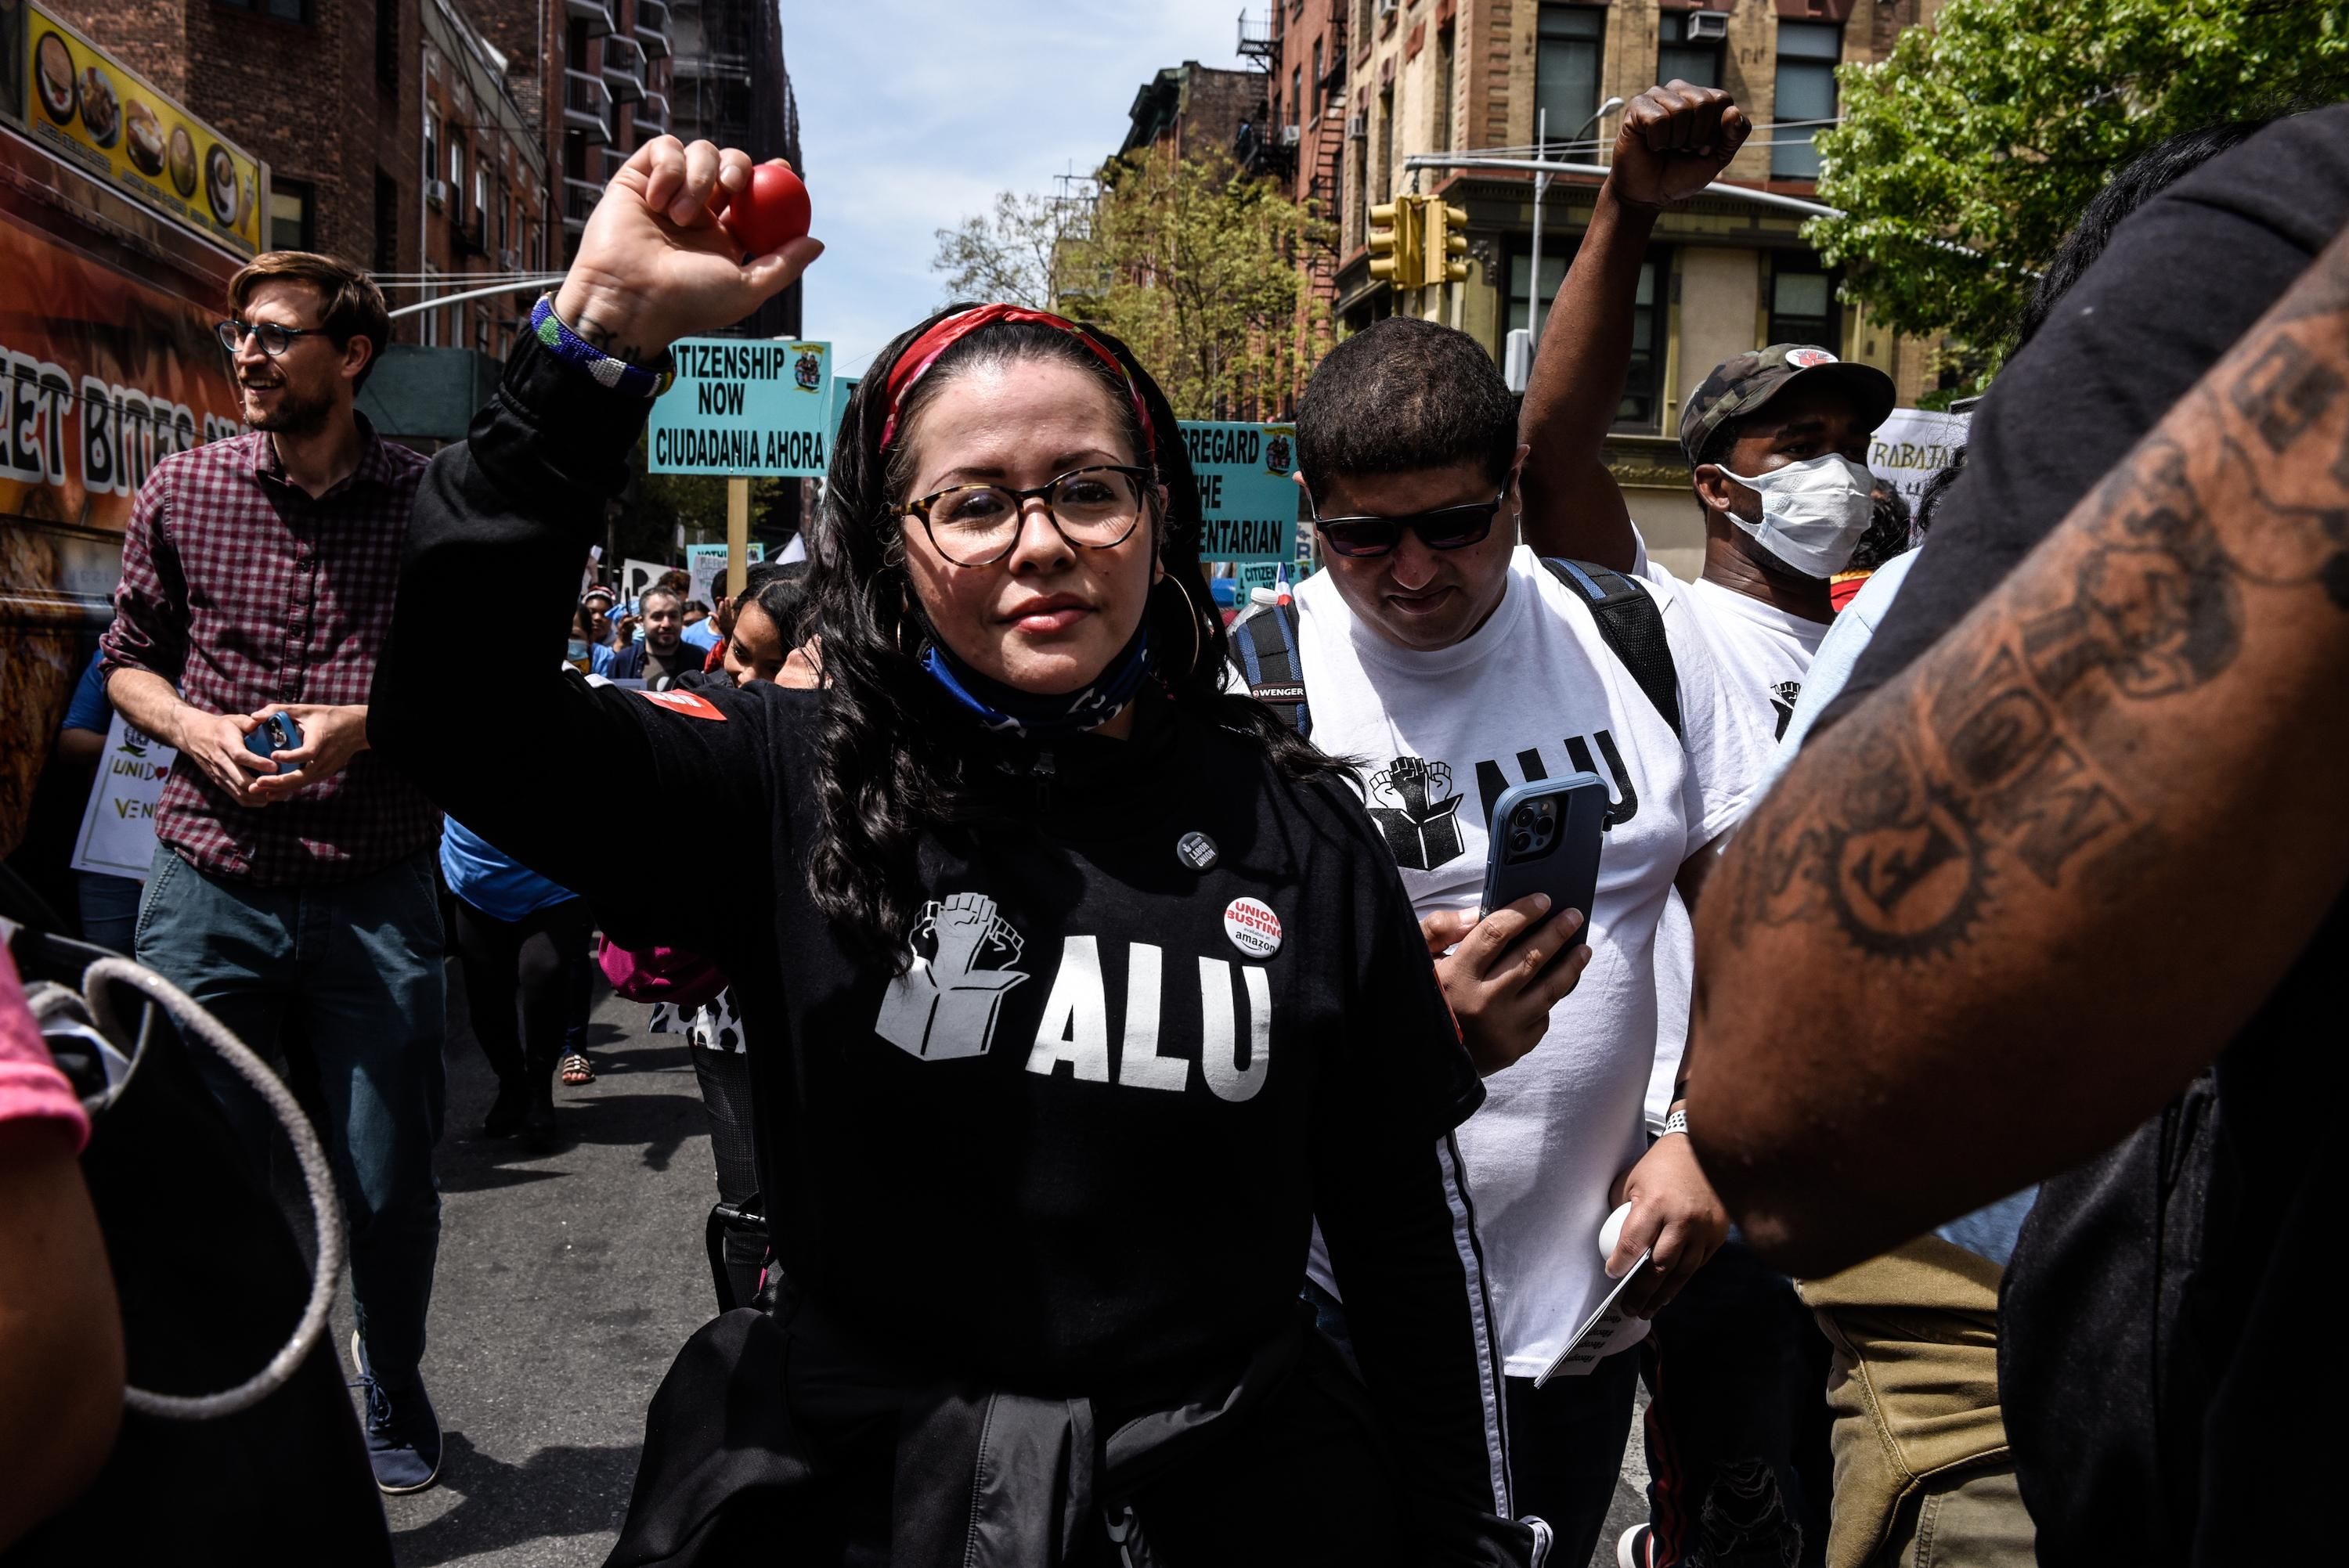 Amazon workers participate in a May Day rally in Manhattan on May 1, 2022Amazon workers participate in a May Day rally in Manhattan on May 1, 2022 in New York City. (Photo: Stephanie Keith/Getty Images) in New York City. (Photo: Stephanie Keith/Getty Images)